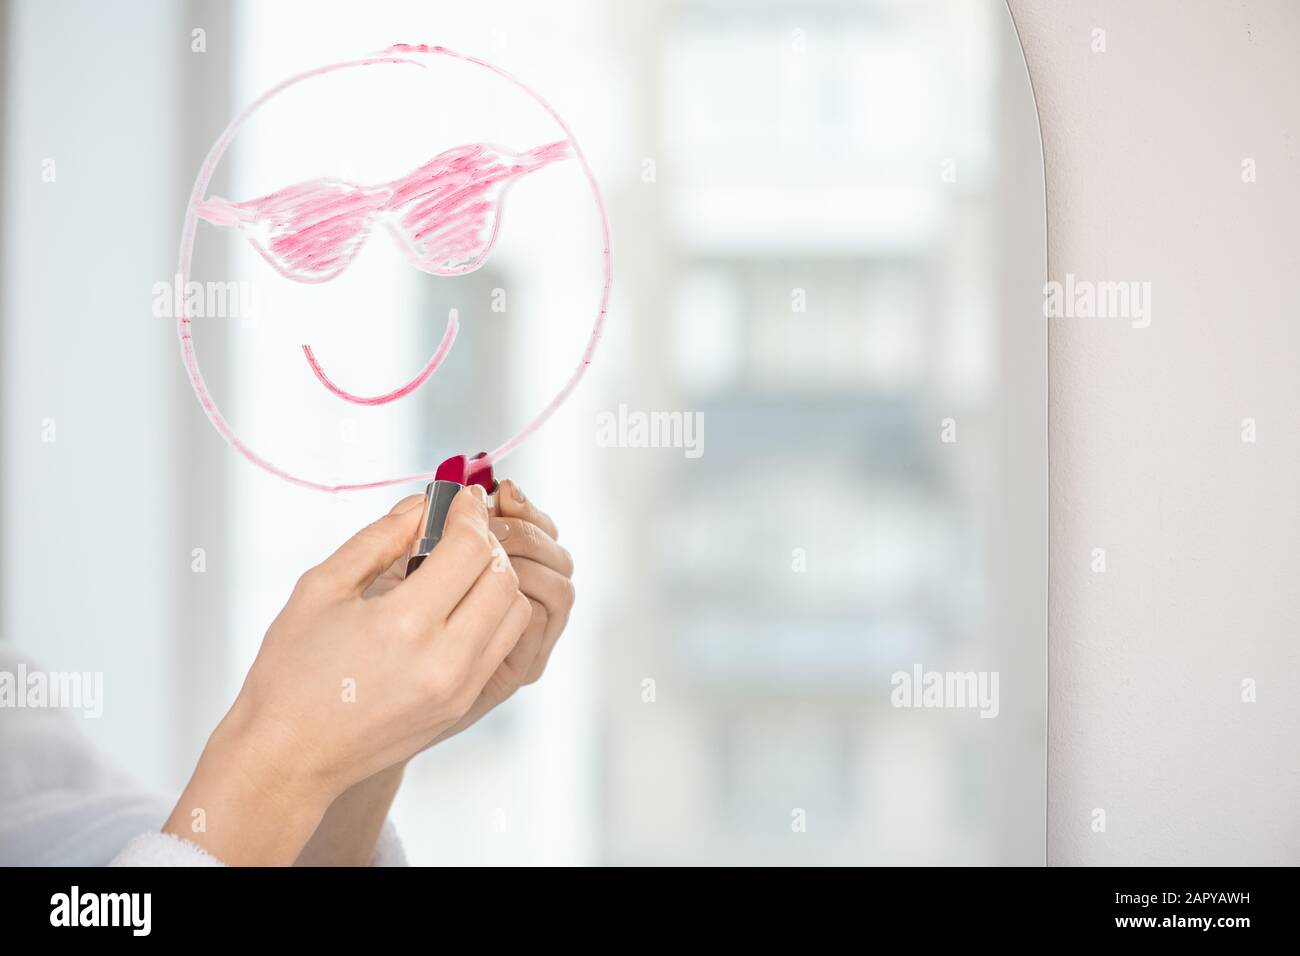 Hand of girl with lipstick drawing face with smile and sunglasses on mirror Stock Photo